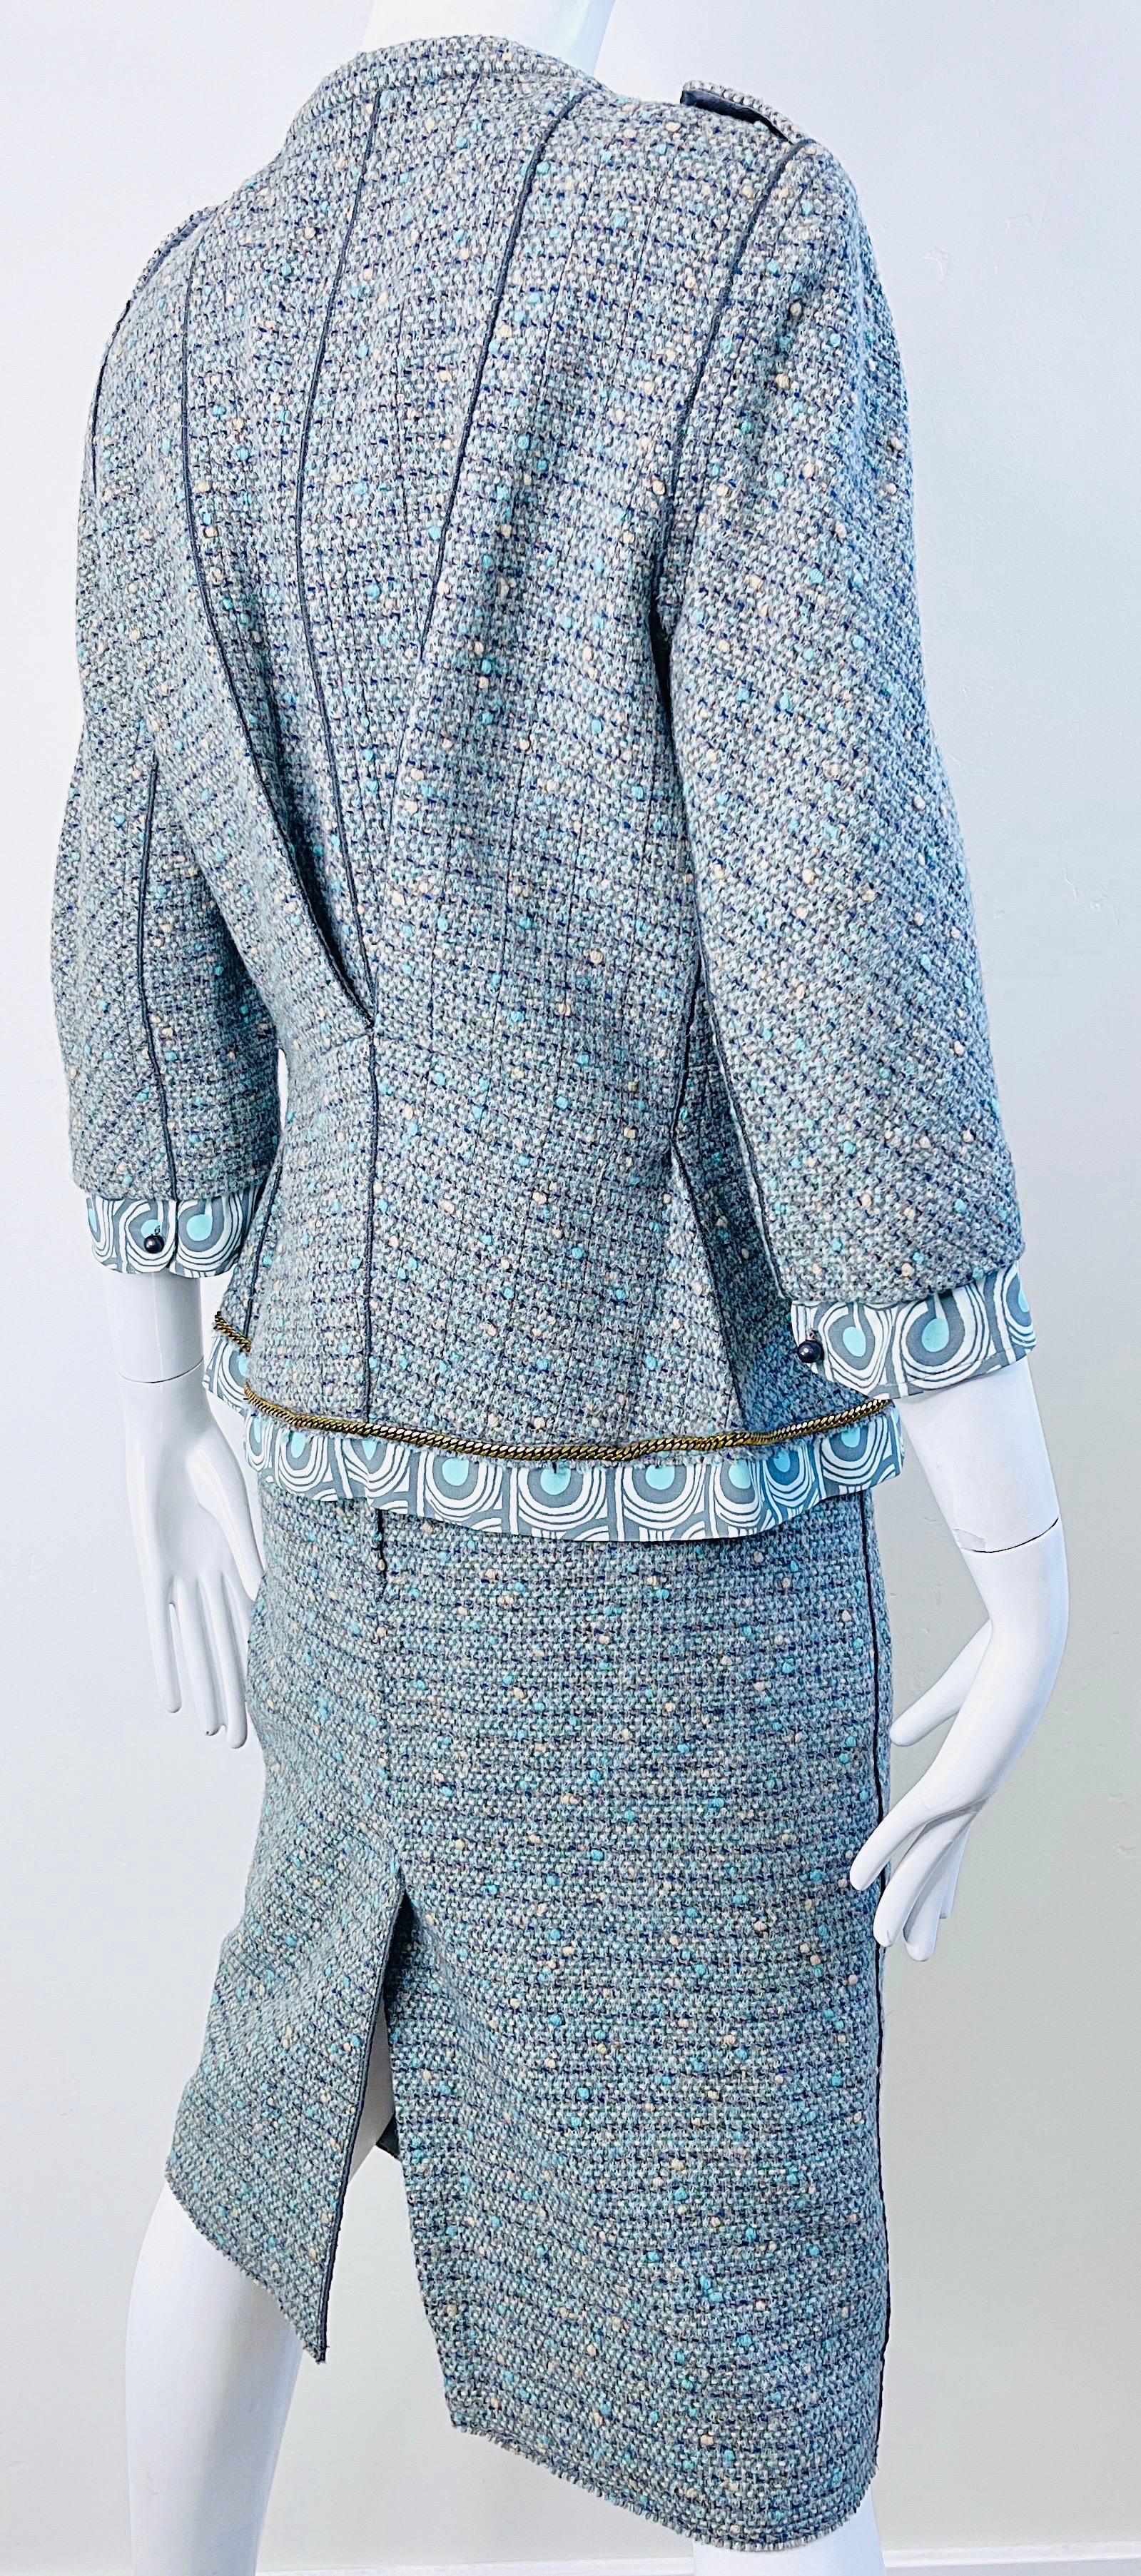 Marc Jacobs Spring 2005 Size 8 Blue Green Fantasy Tweed Wool Skirt Suit For Sale 8